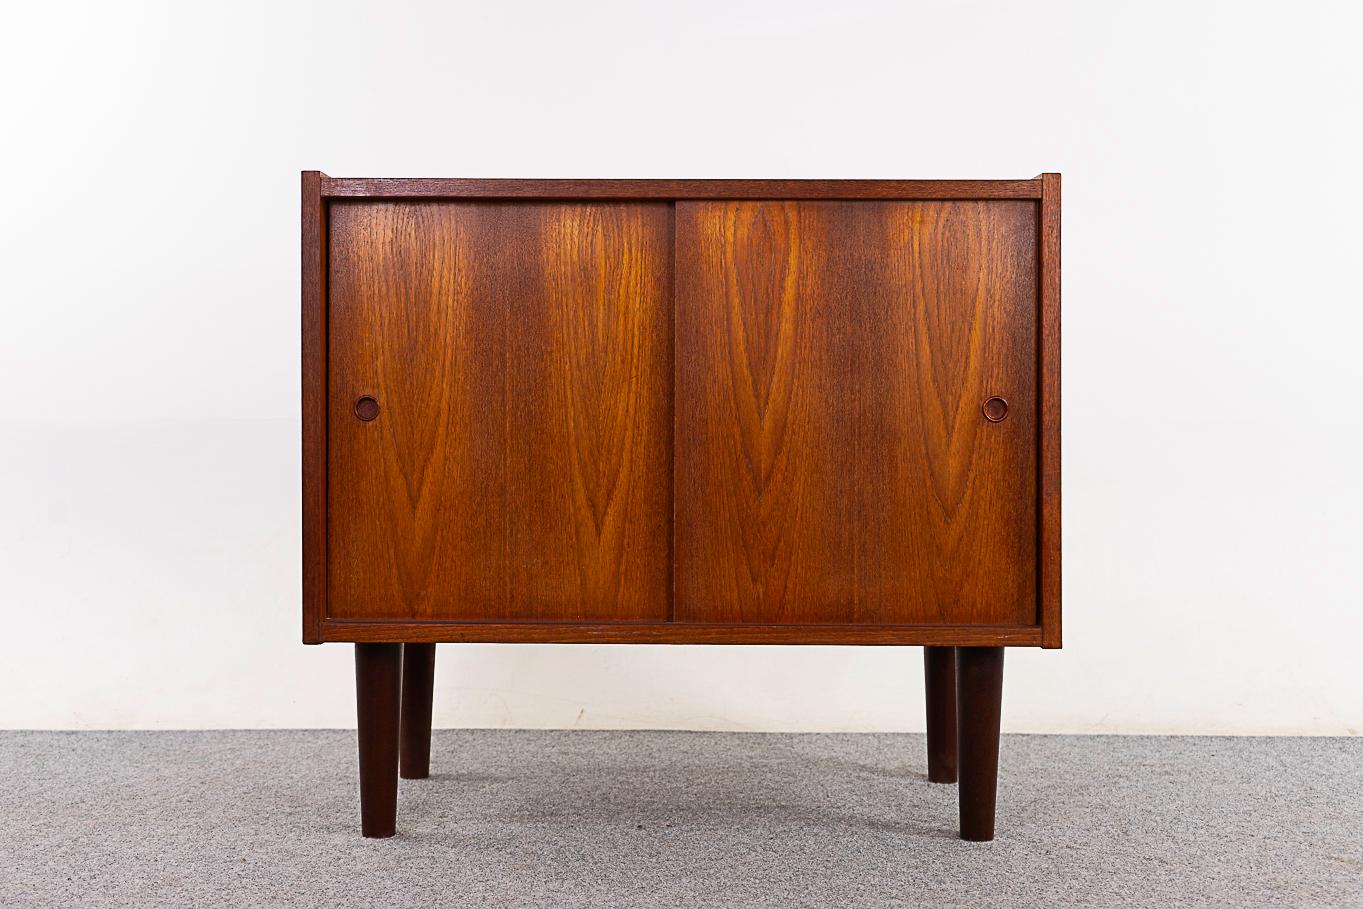 Teak Danish cabinet, circa 1960's. Clean, simple lines, lovely book-matched veneer case and solid tapering legs. Height adjustable shelf and sleek finger pull handles.  

Unrestored item with option to purchase in restored condition for an